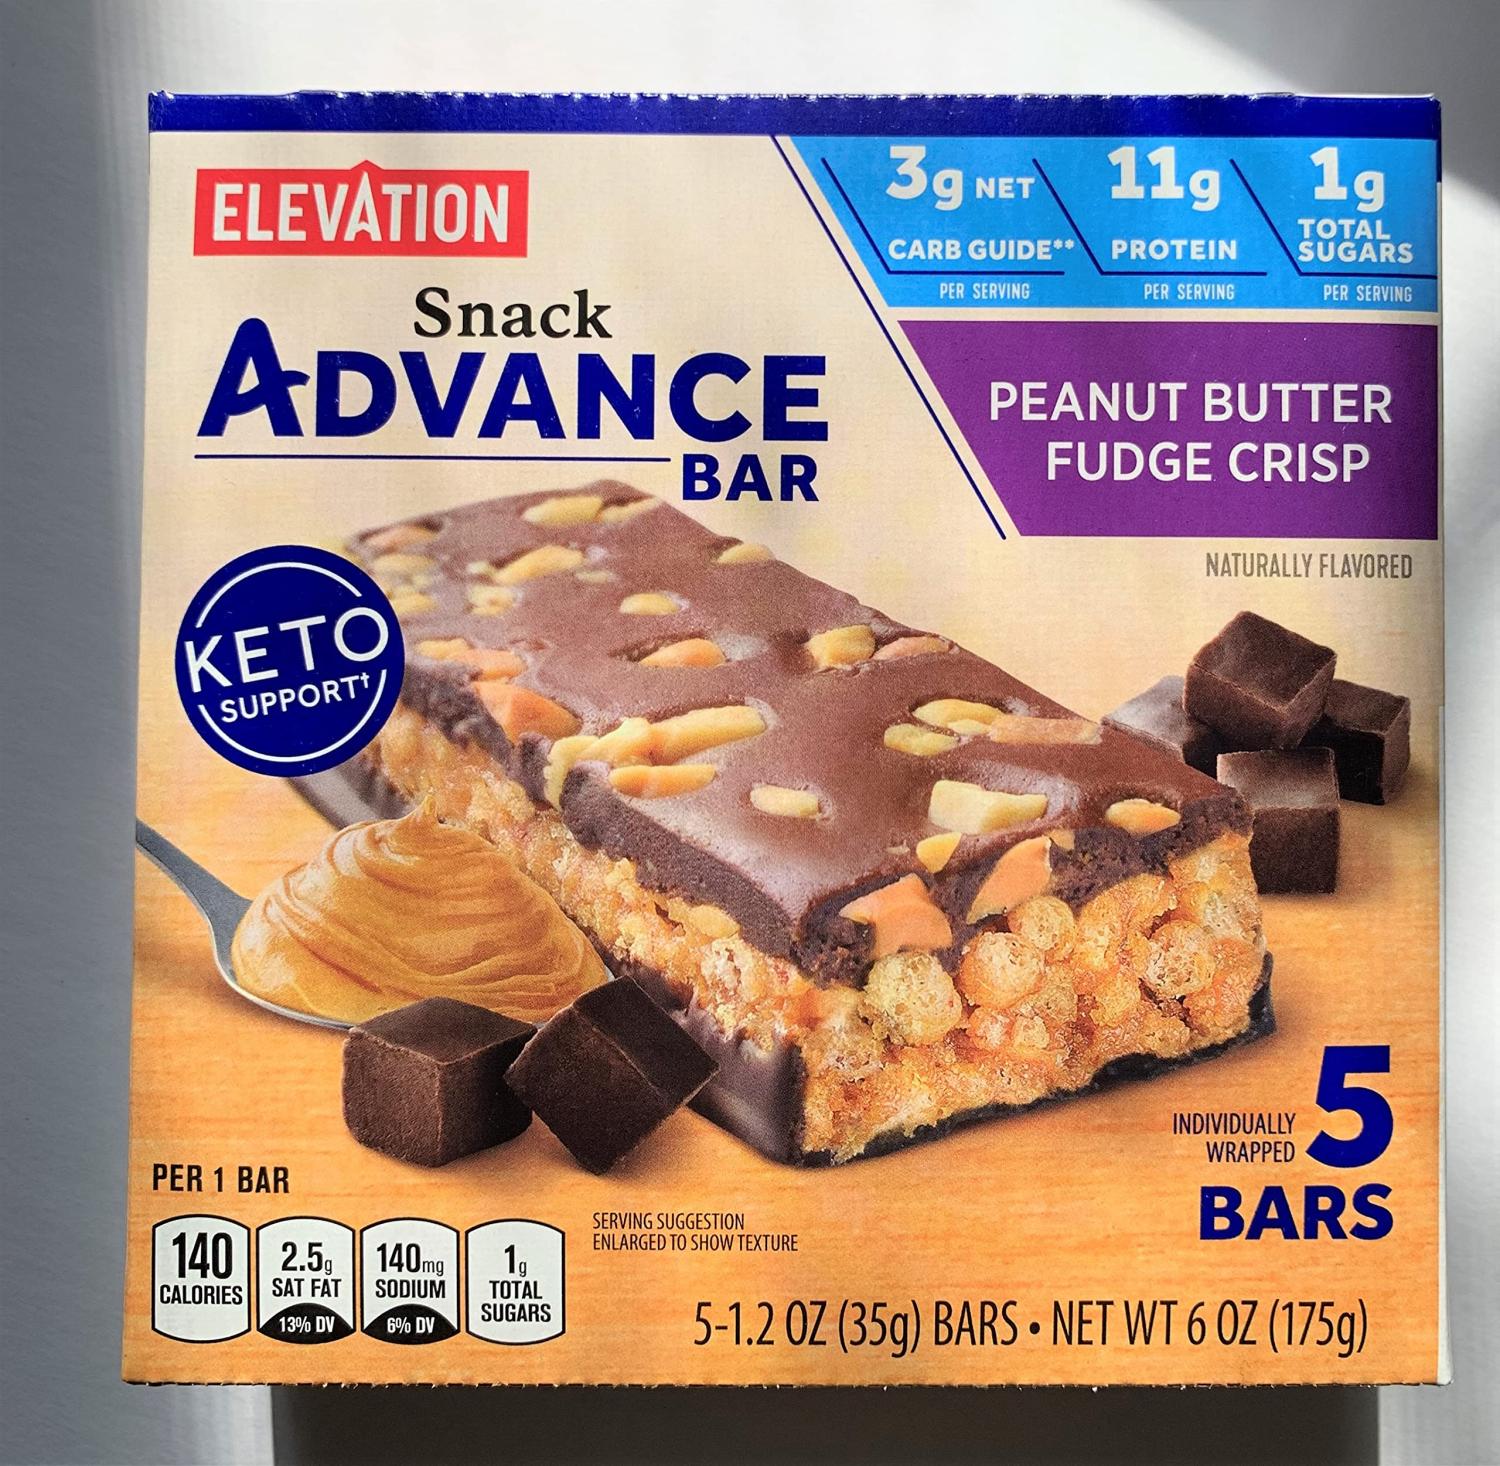 EPIC® Peanut Butter Chocolate Performance Bars 9 Count, 16.83 oz